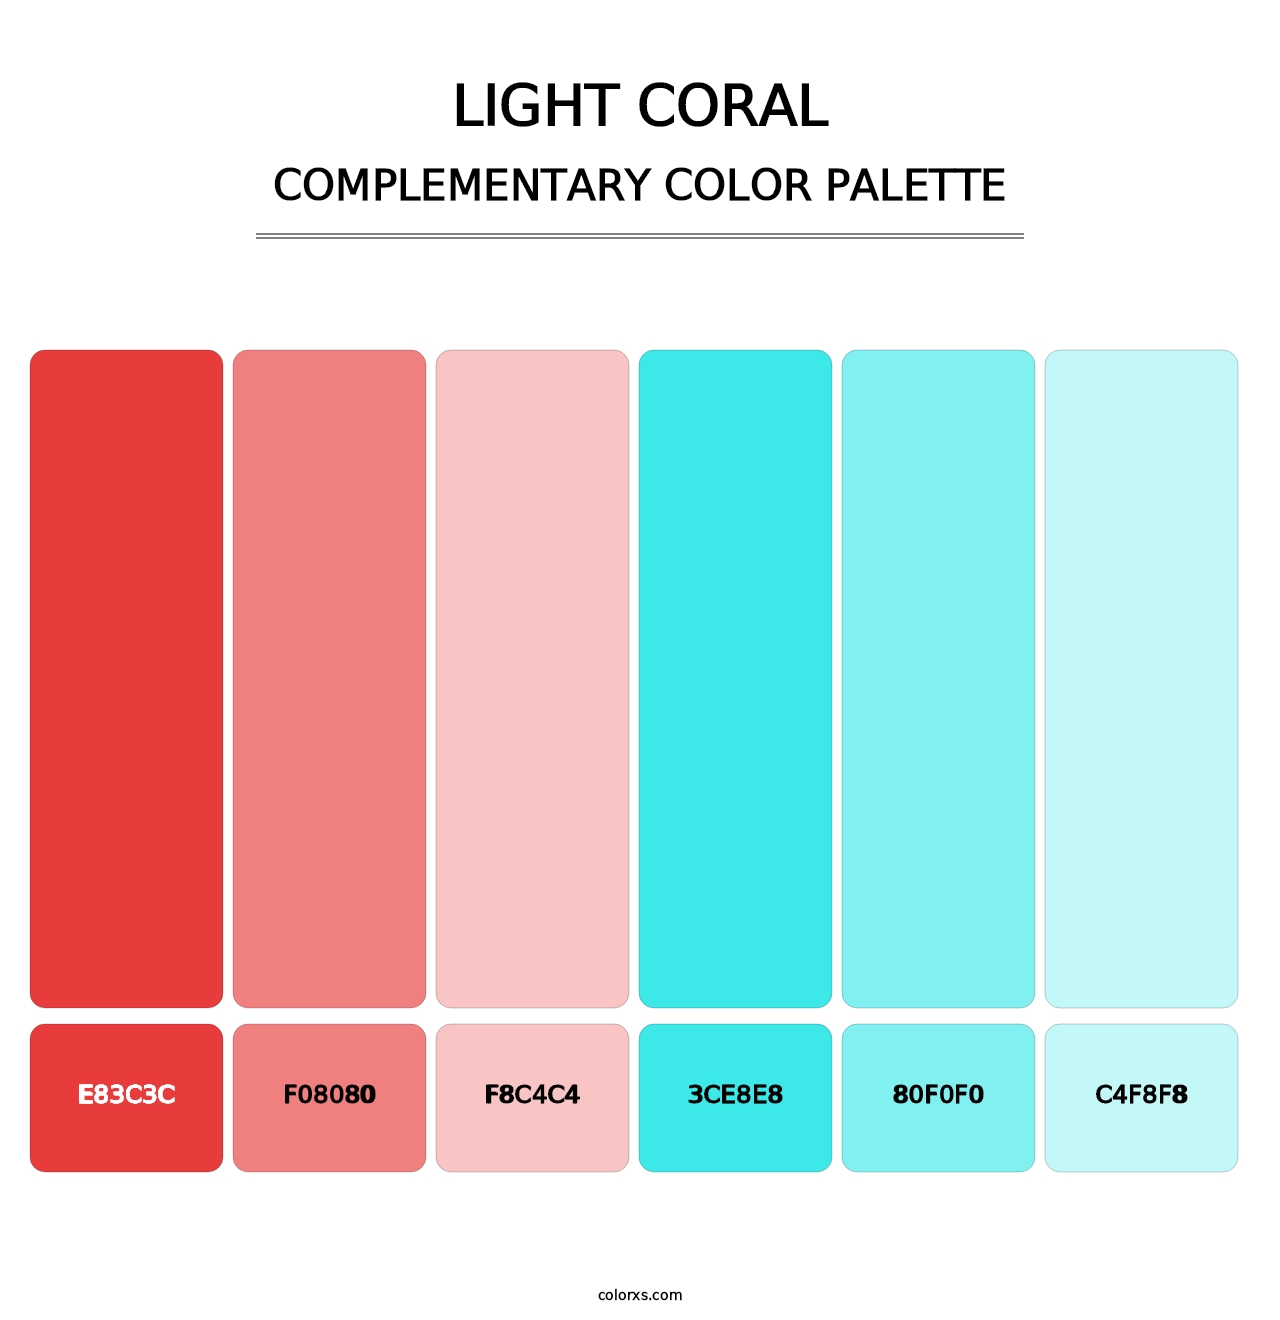 Light Coral - Complementary Color Palette